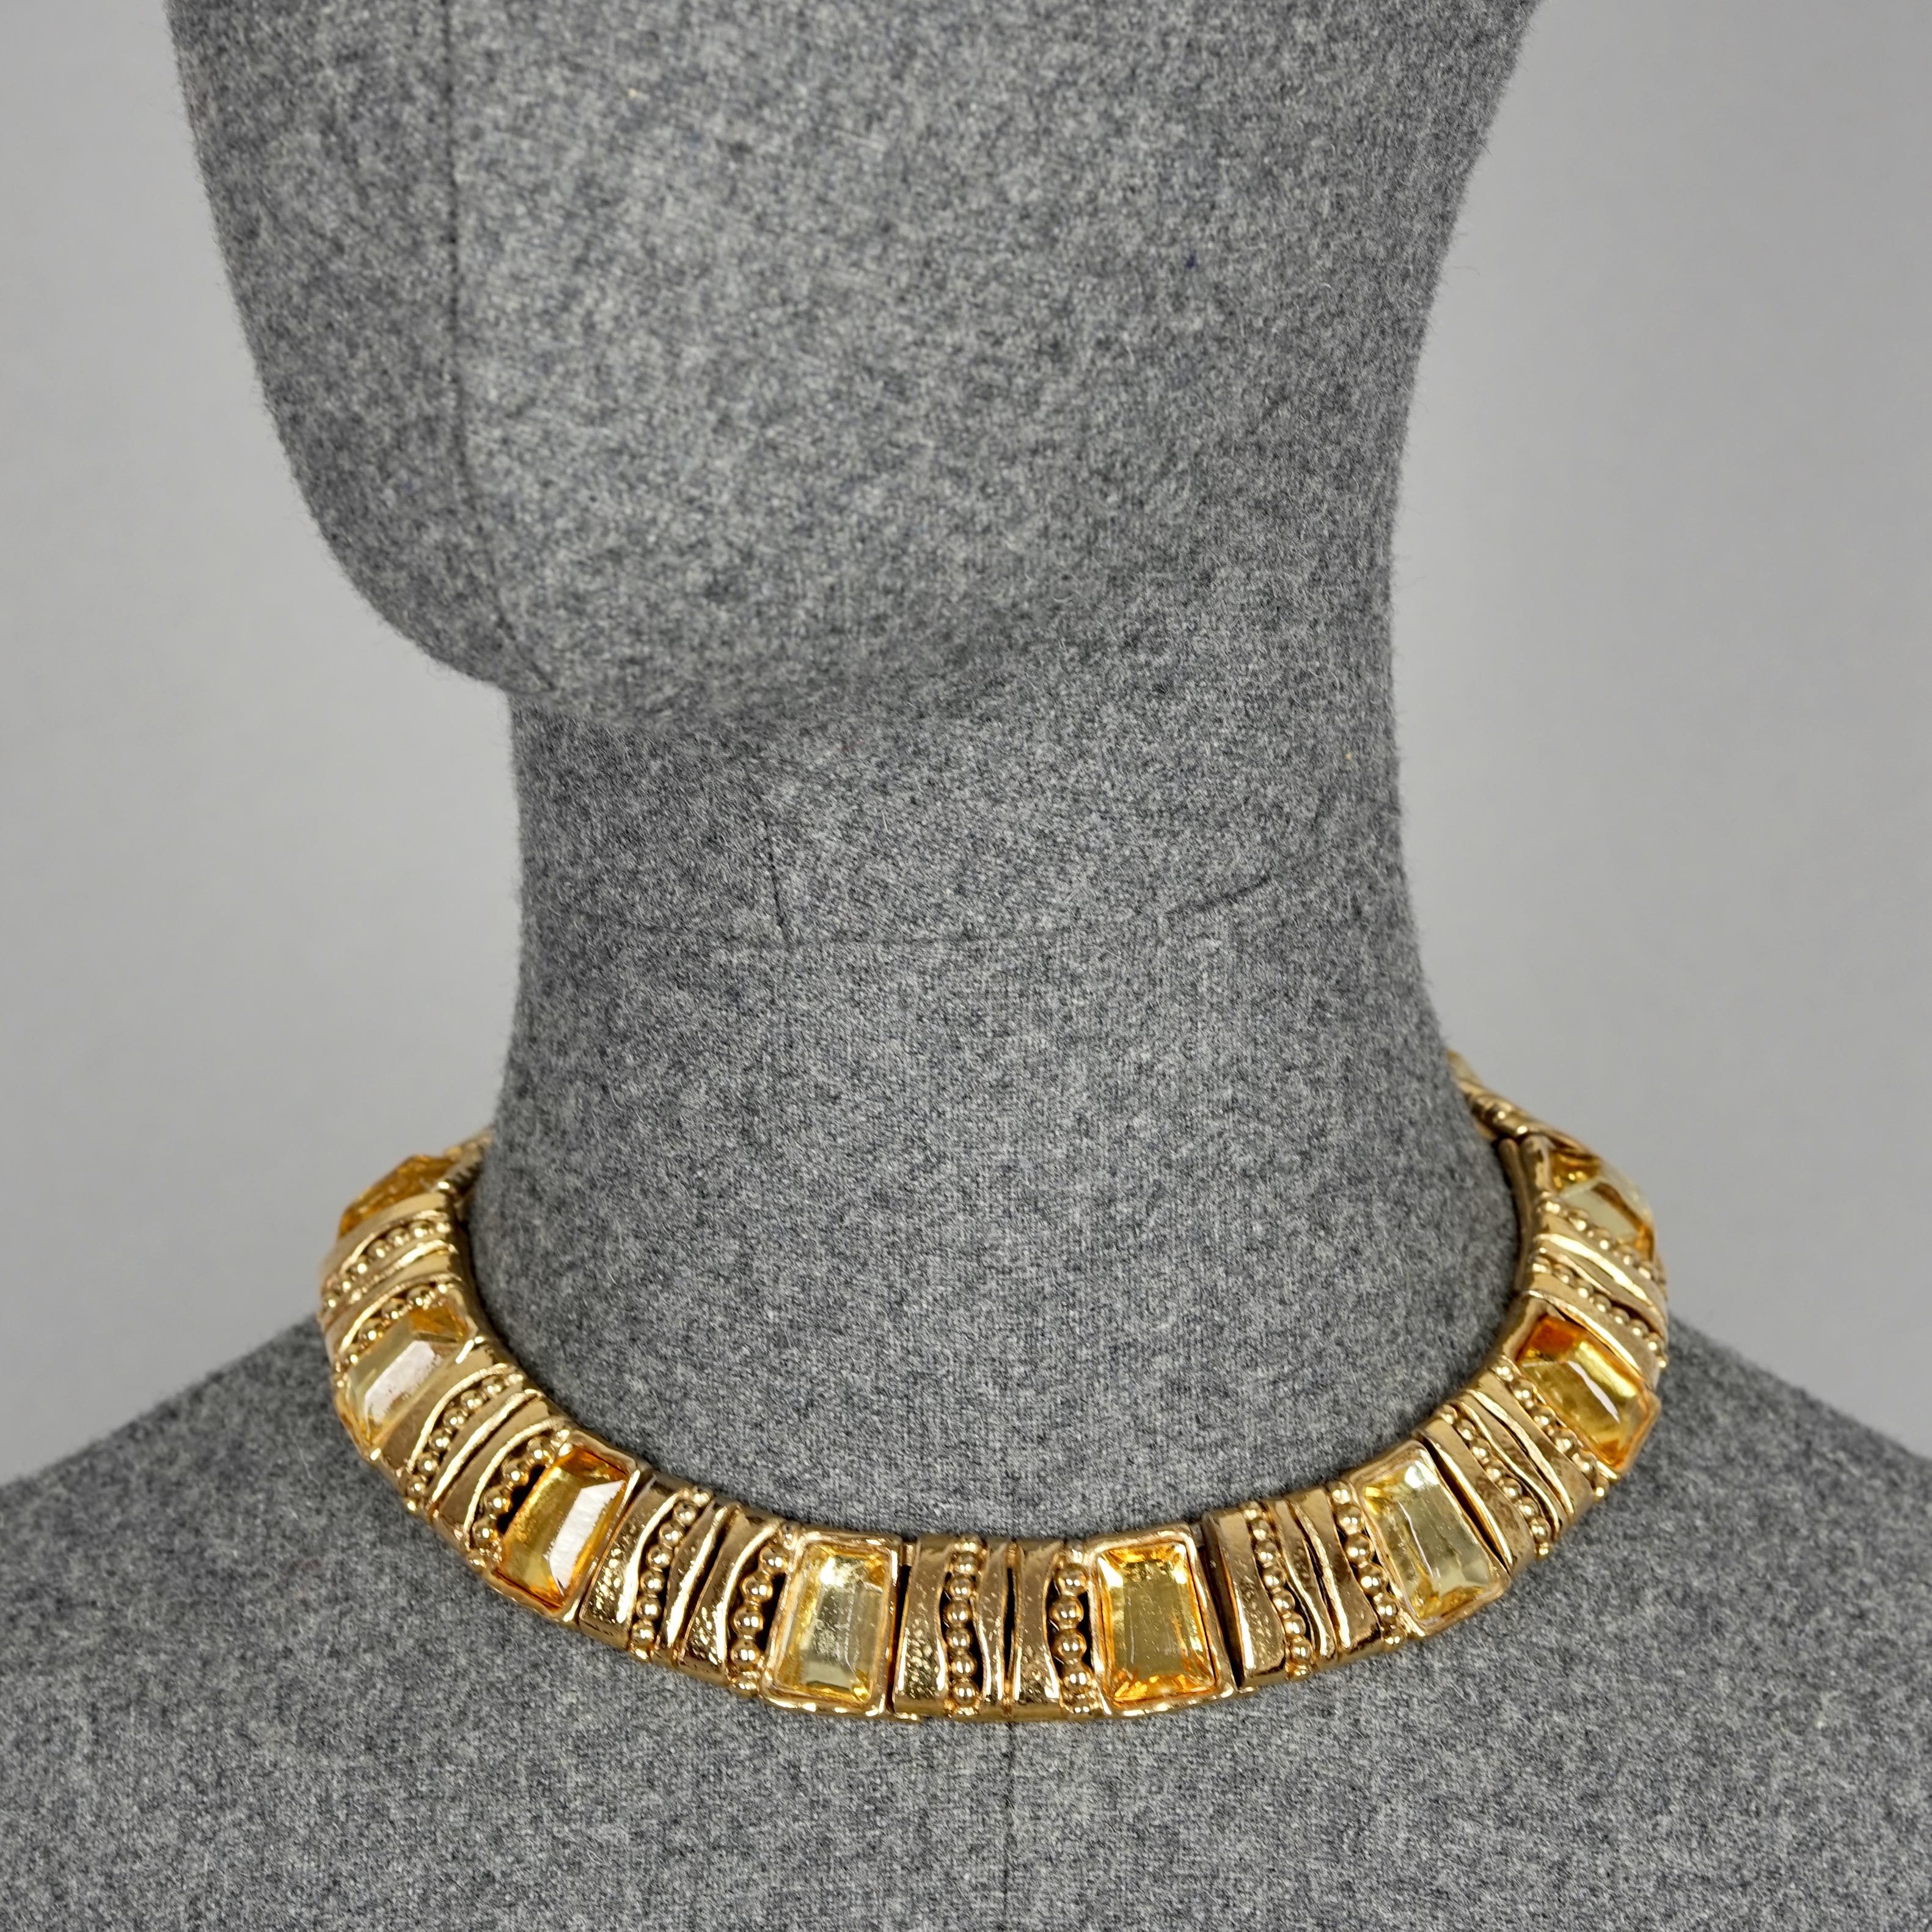 Vintage JEAN LOUIS SCHERRER Citrine Articulated Choker Necklace

Measurements:
Height: 0.78 inch (2 cm) 
Inside Length: 13.77 inches (35 cm)

Features:
- 100% Authentic JEAN LOUIS SCHERRER.
- Gilt and citrine resin link articulated choker